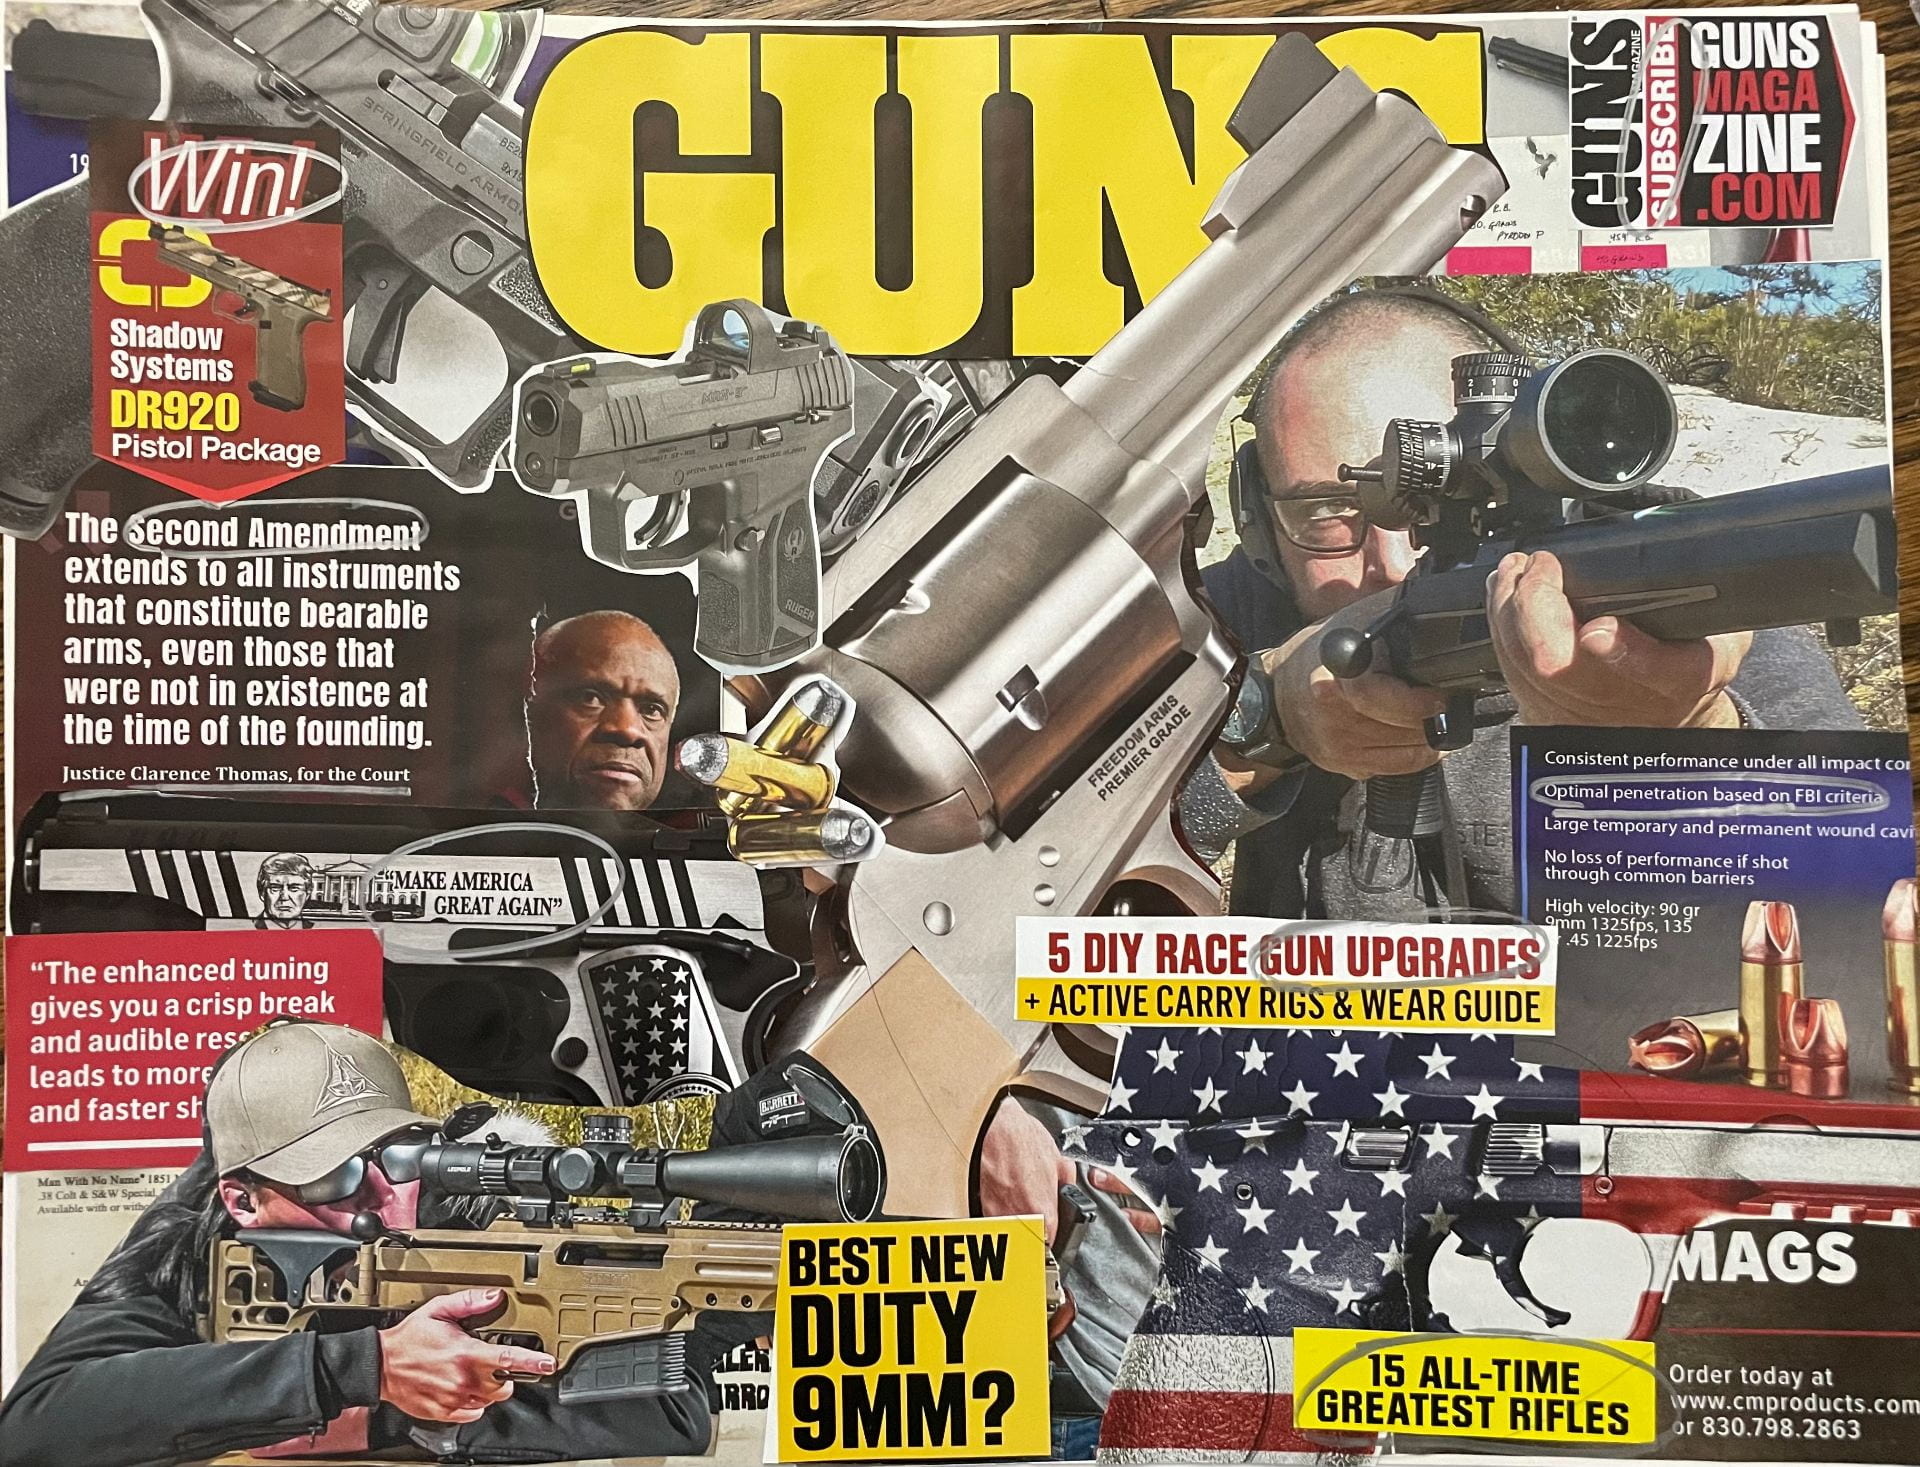 This image depicts a photo collage made from magazine clippings. "GUNS" in big, yellow letters appear along with numerous photos of firearms.